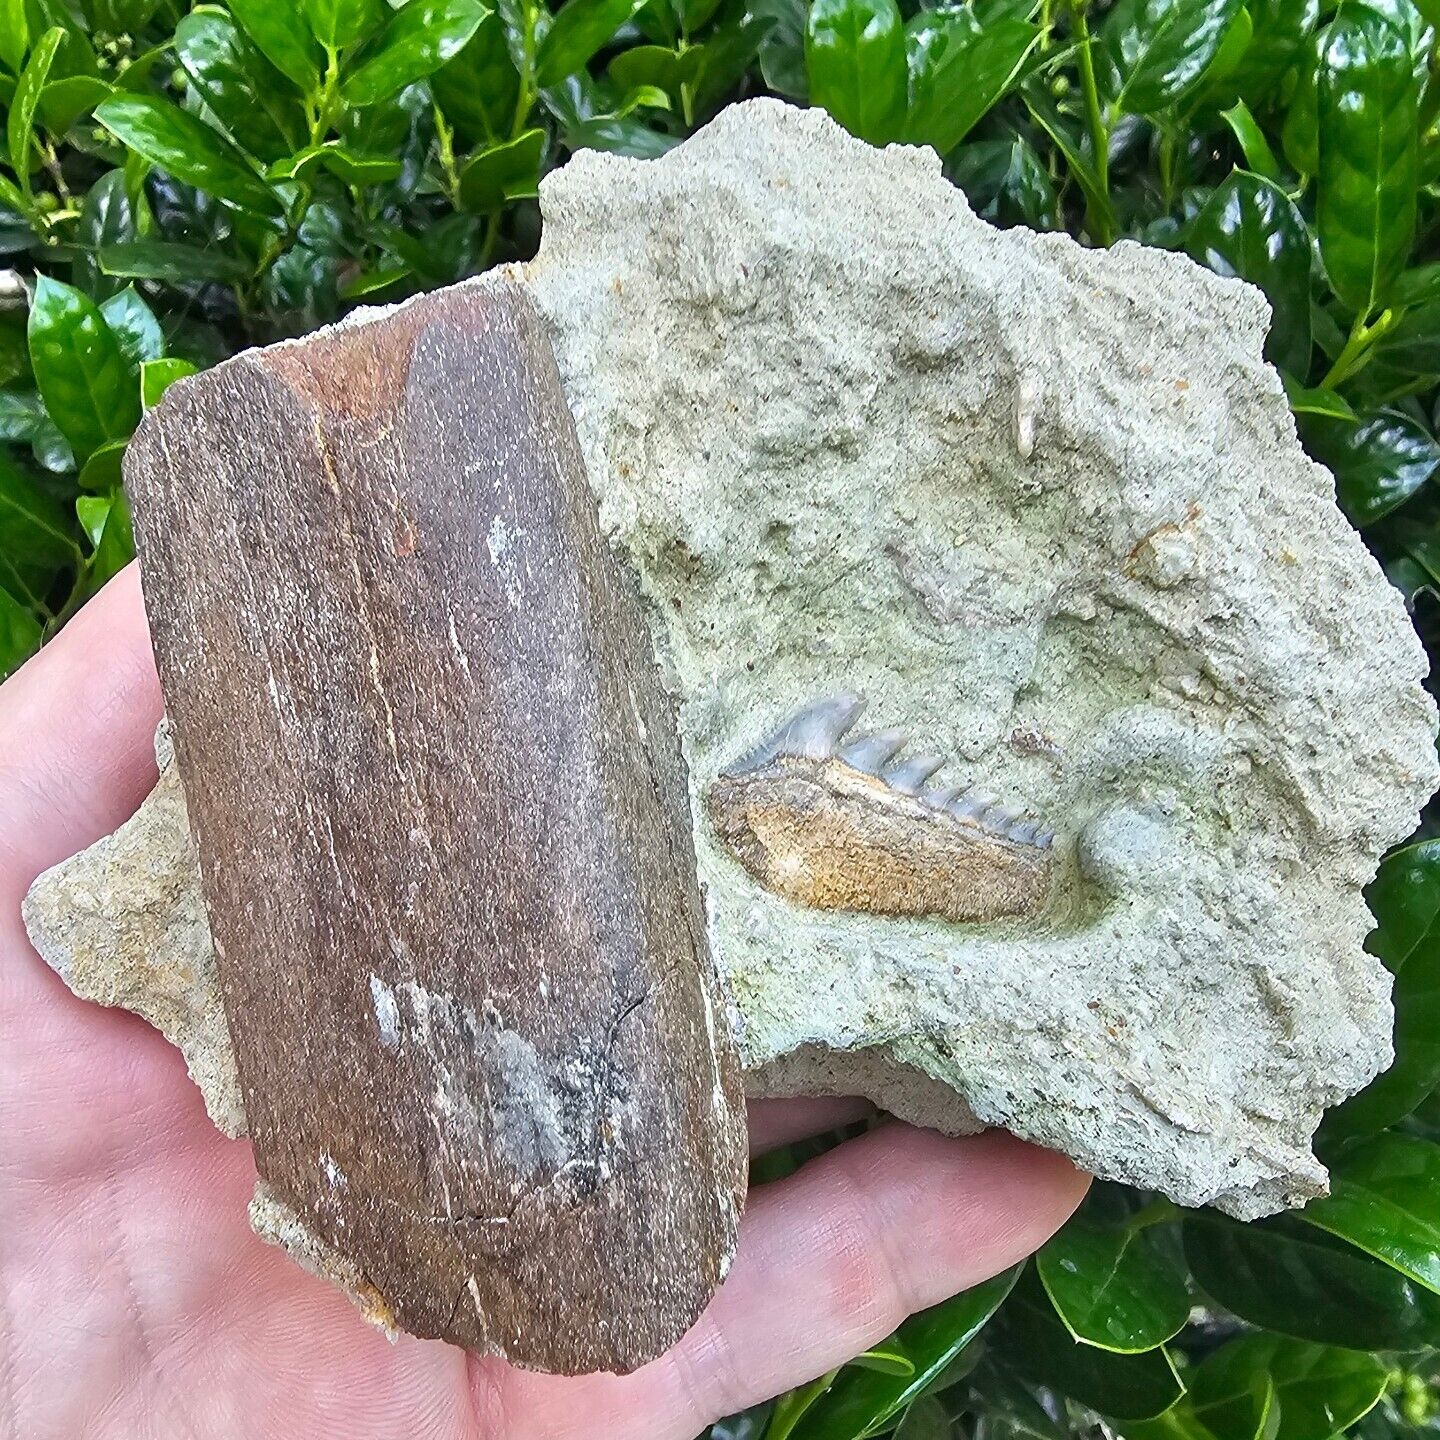 Phenomenal Hexanchus Andersoni Cow Shark Tooth In Matrix With Fossil Rib